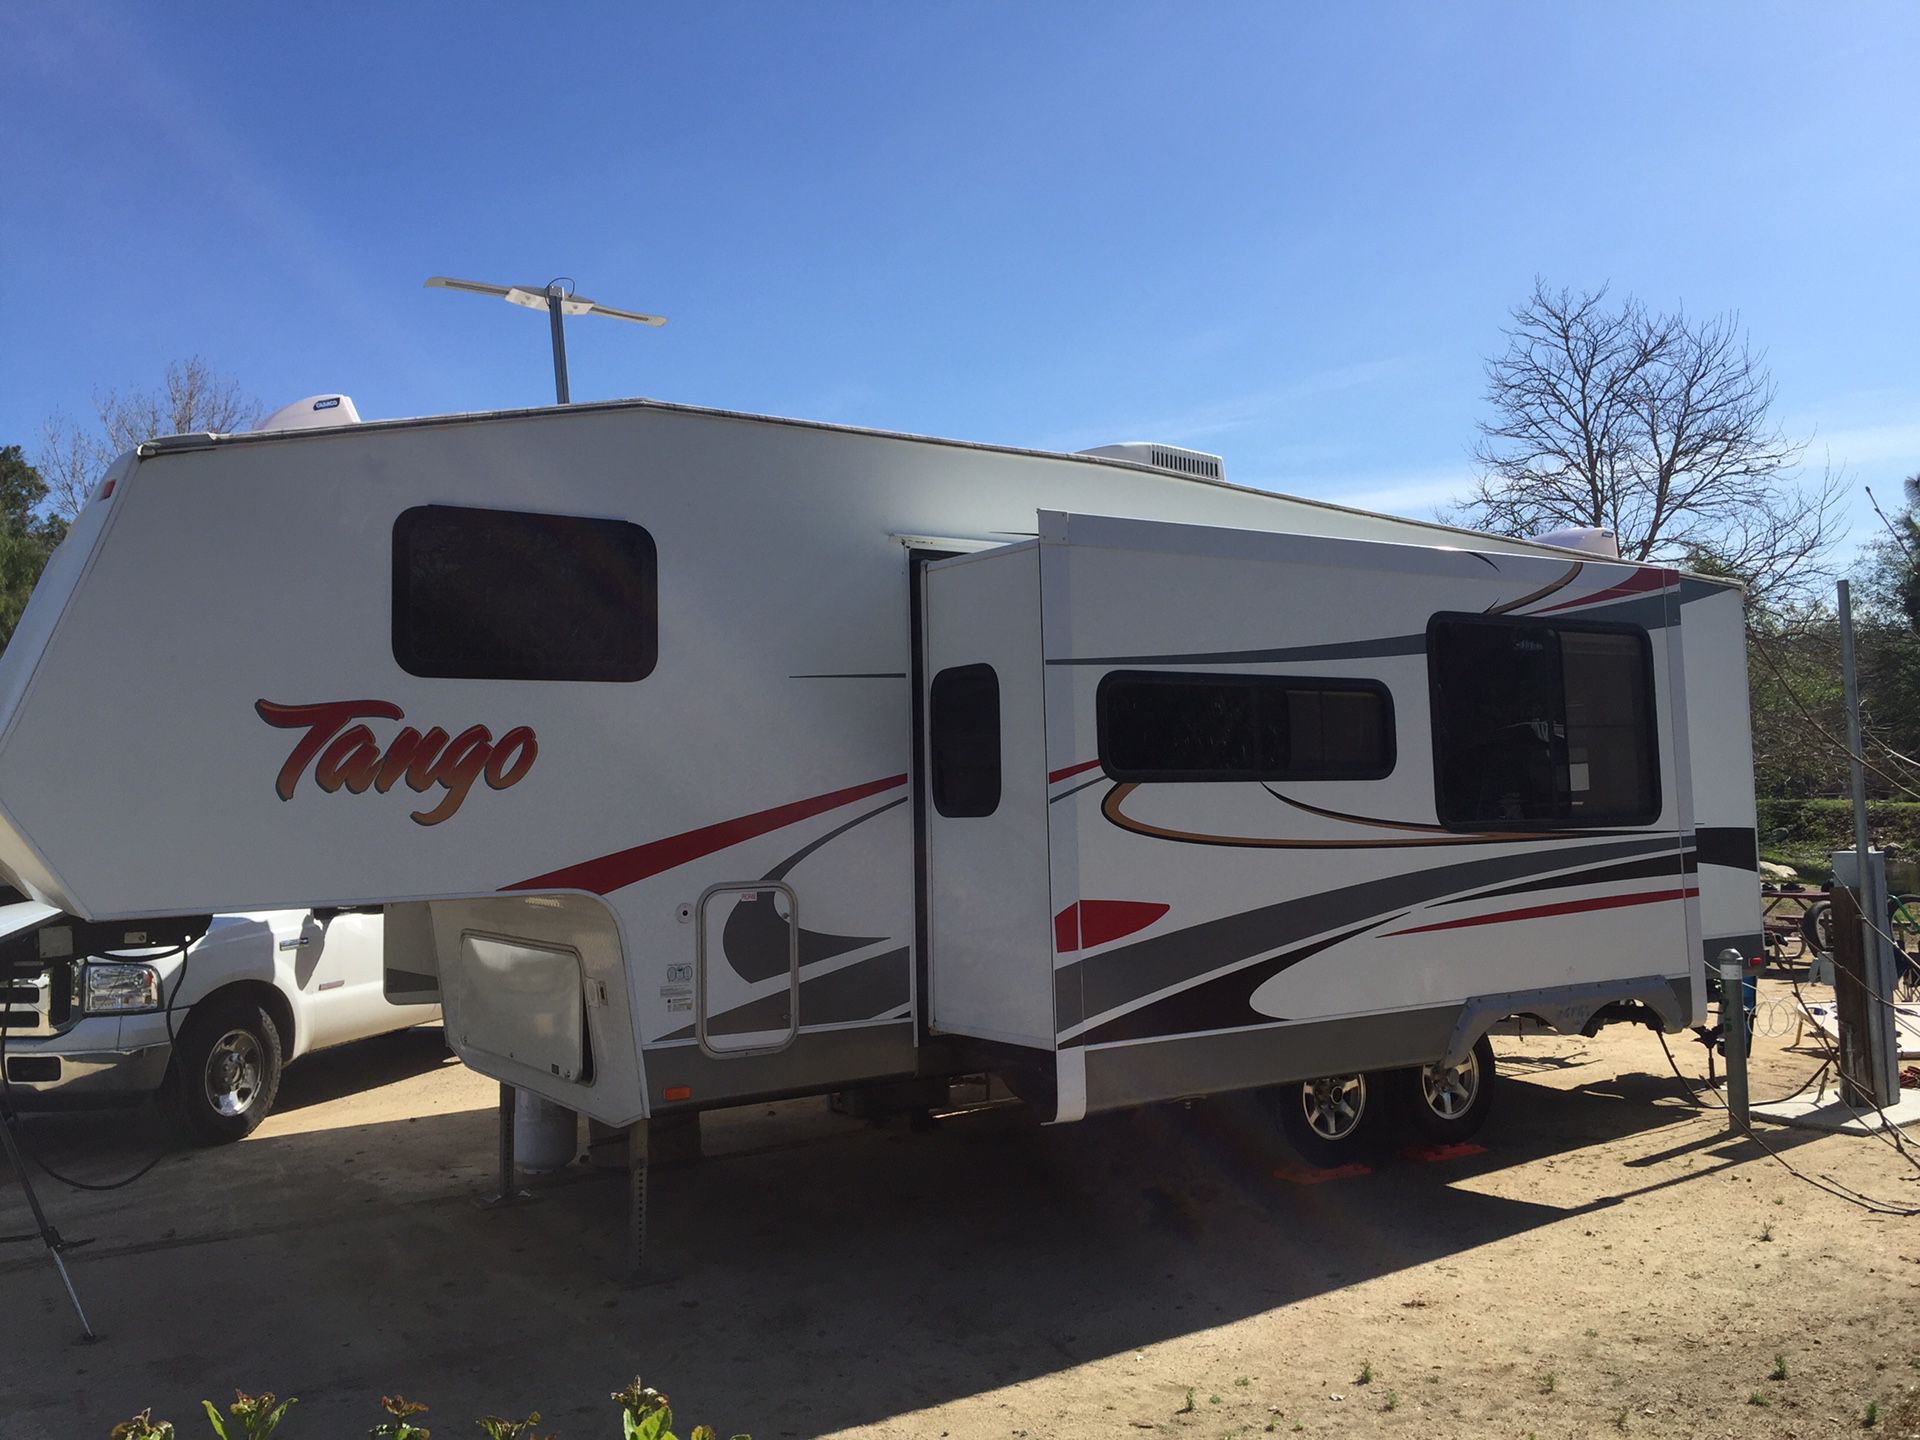 2007 tango travel trailer 28ft long by Pacific Coach Works - 5th wheel